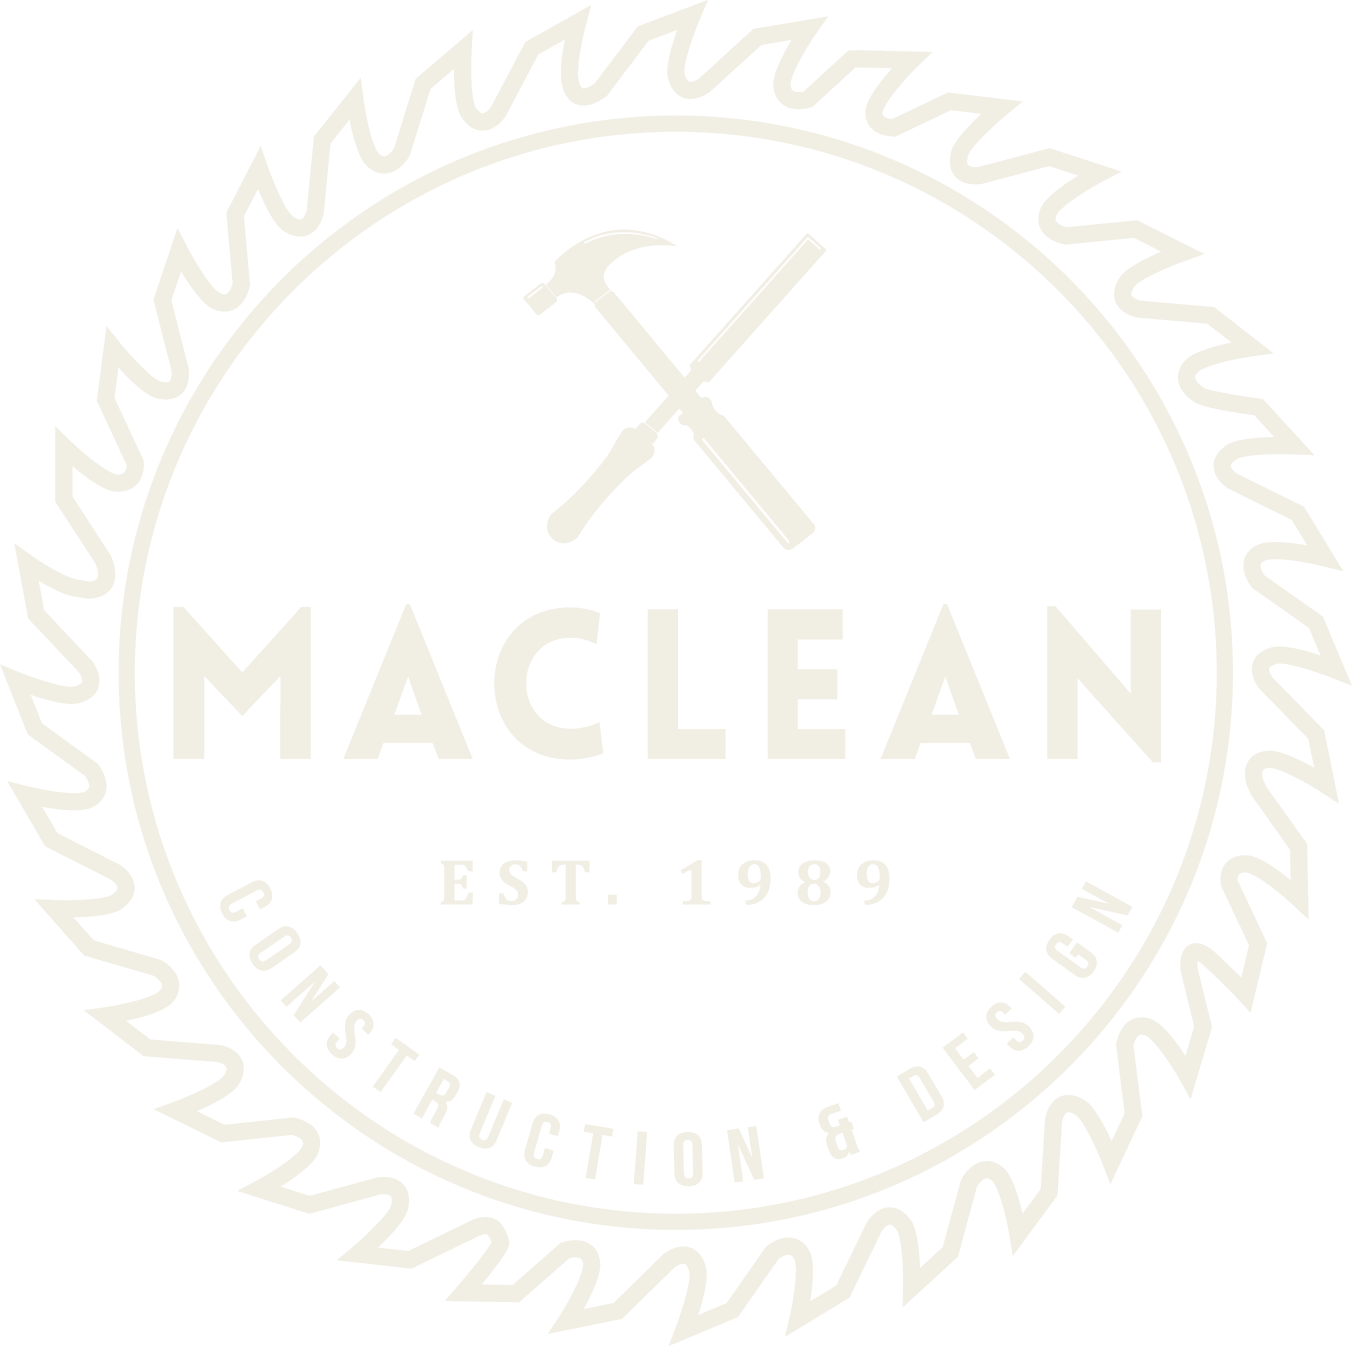 Maclean Construction and Design Logo